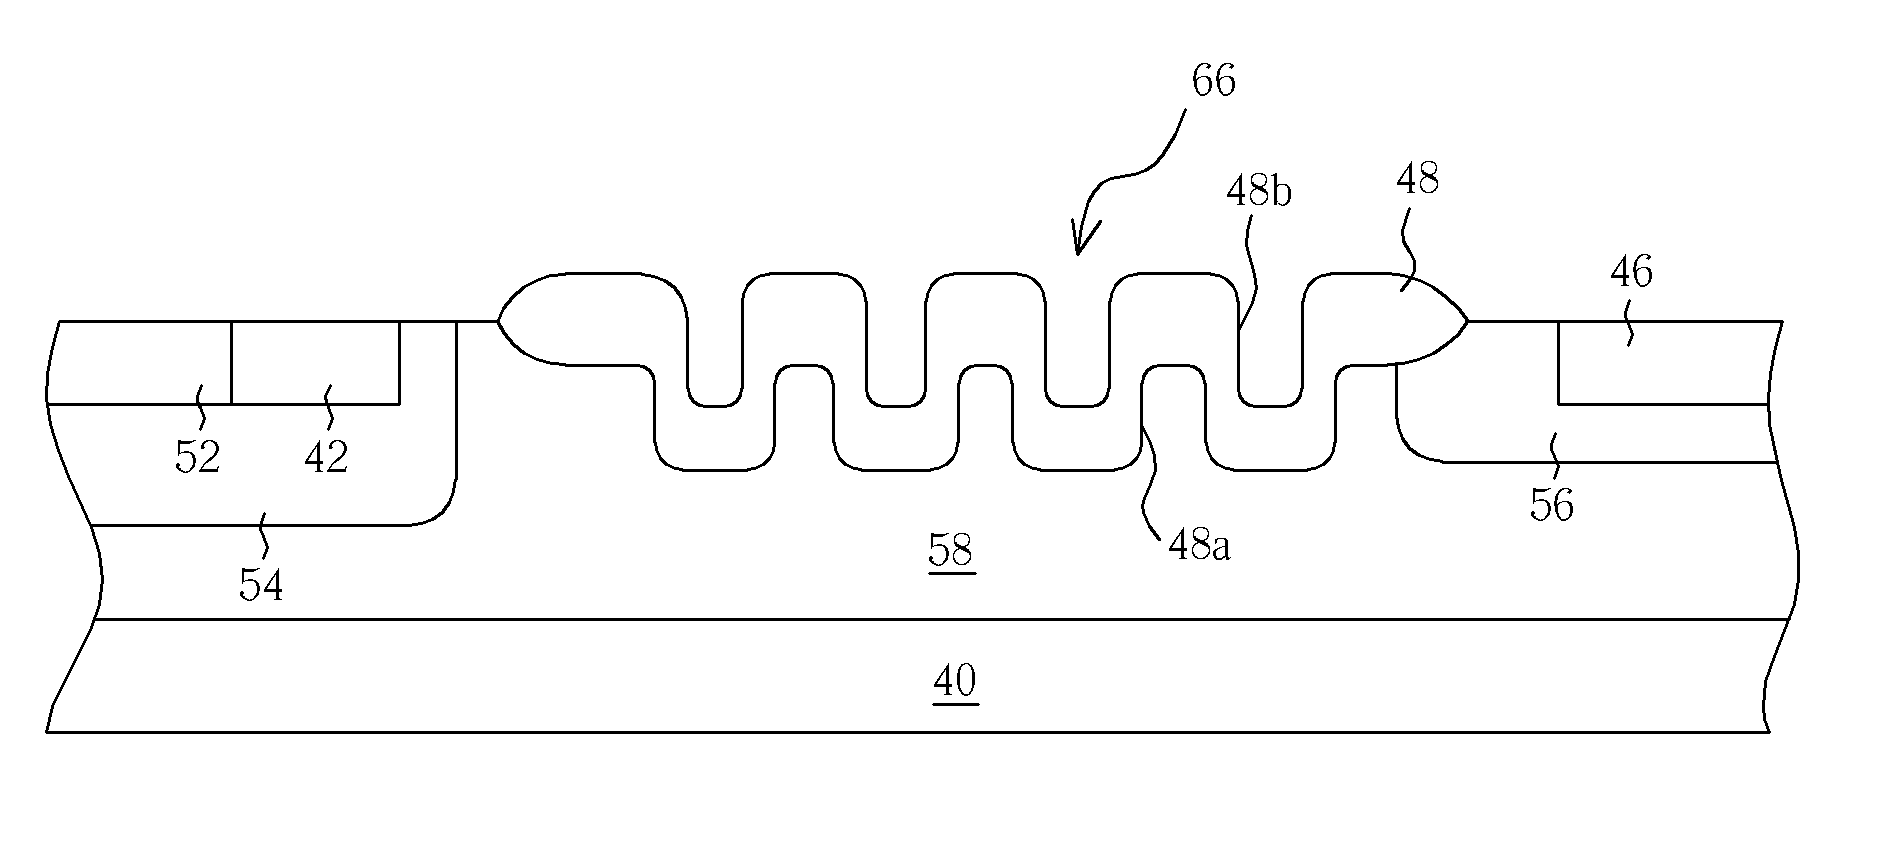 MOS transistor device structure combining Si-trench and field plate structures for high voltage device